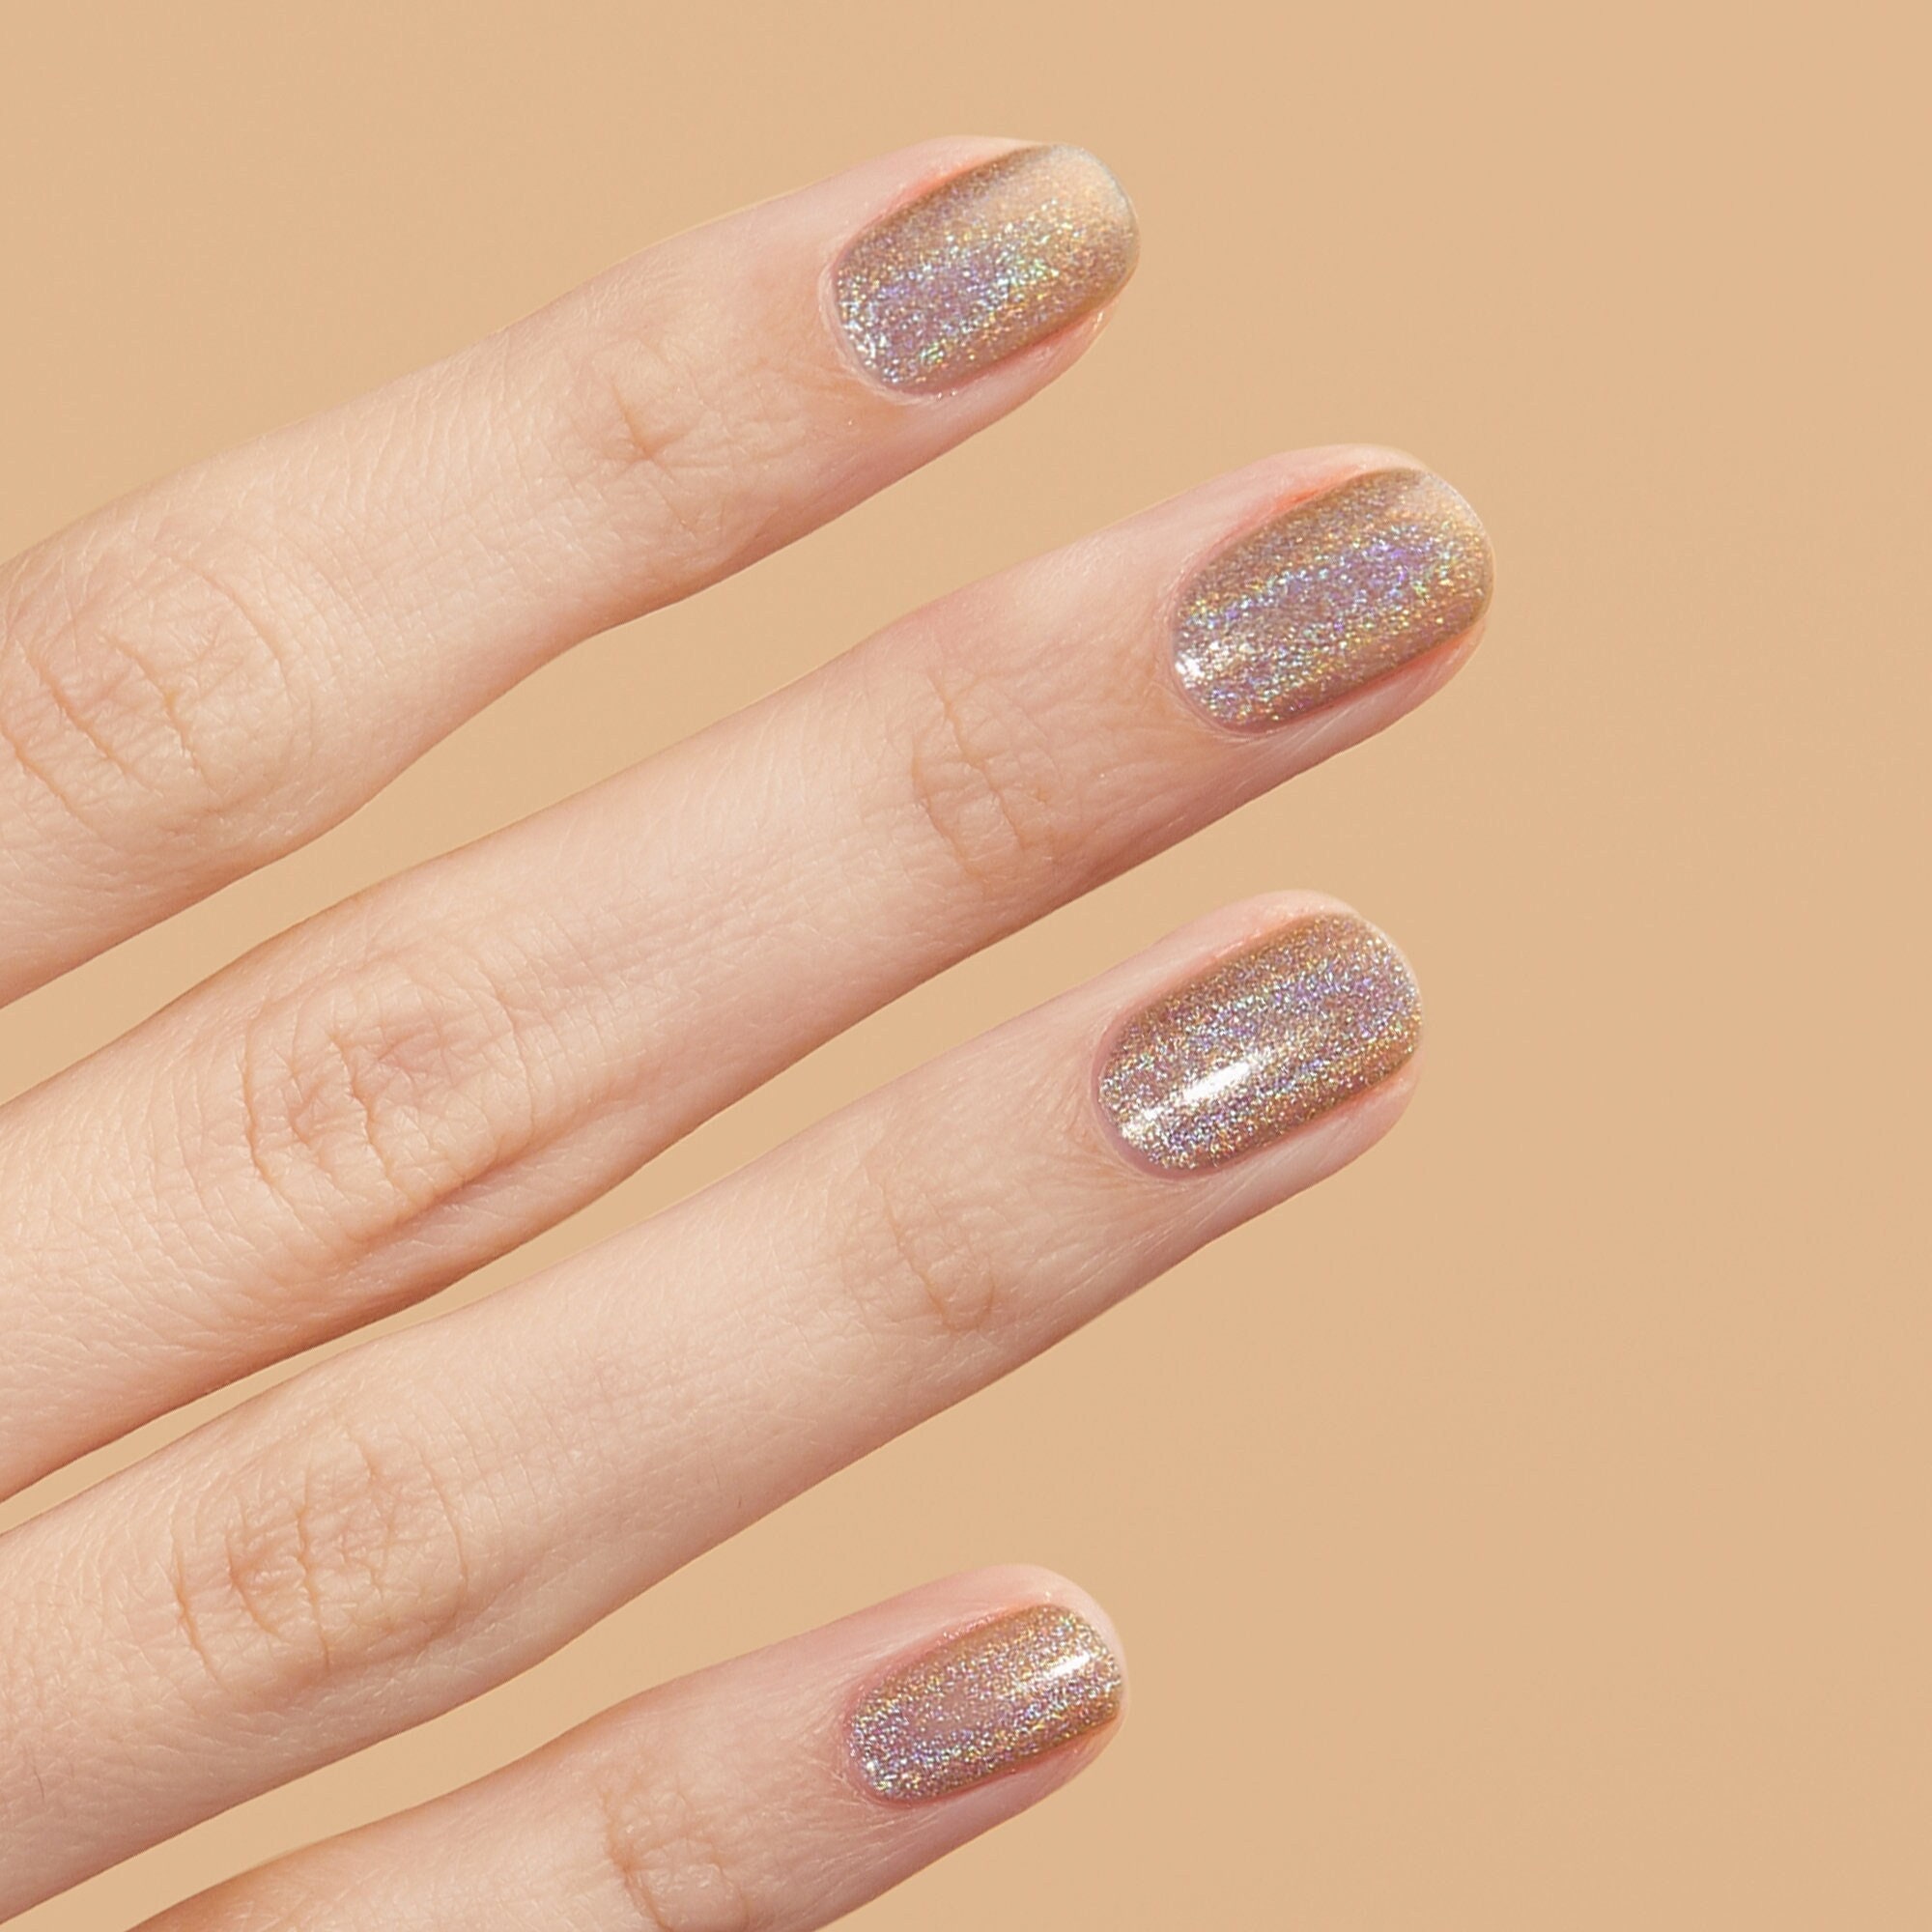 Brown French Tip Nails Are Fall 2022's Hottest Manicure Design